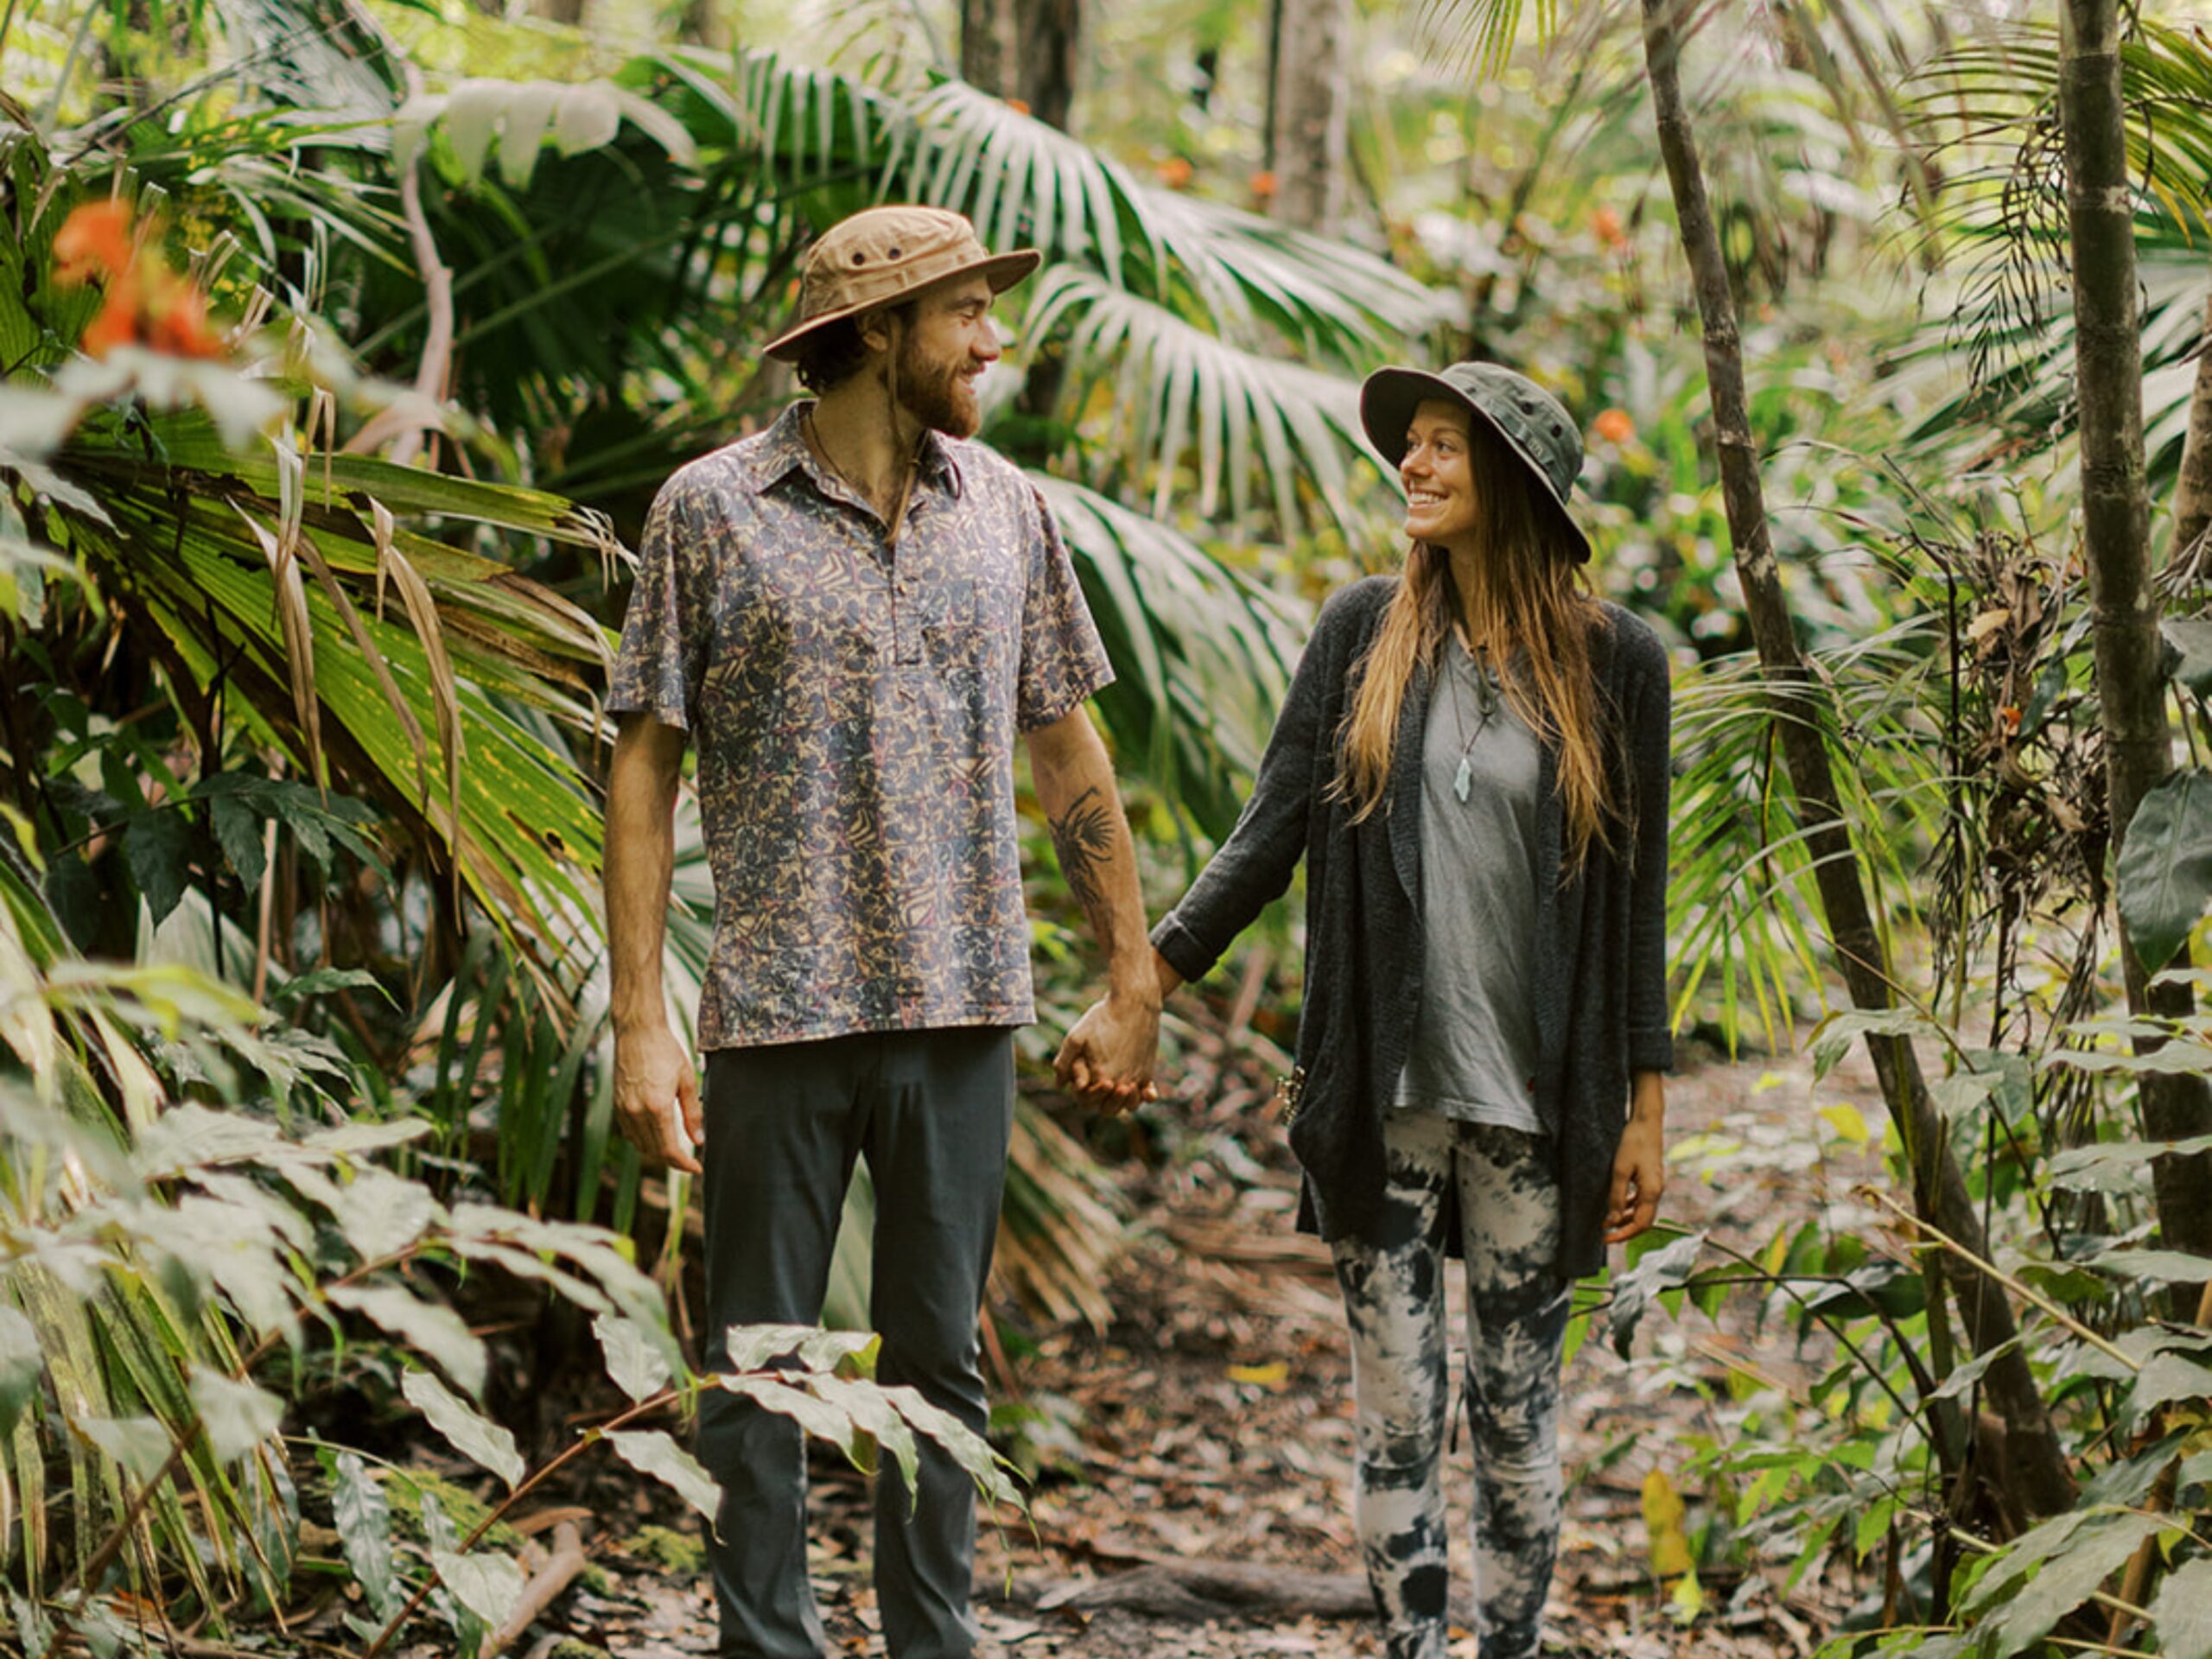 A couple walking through the forest holding hands.